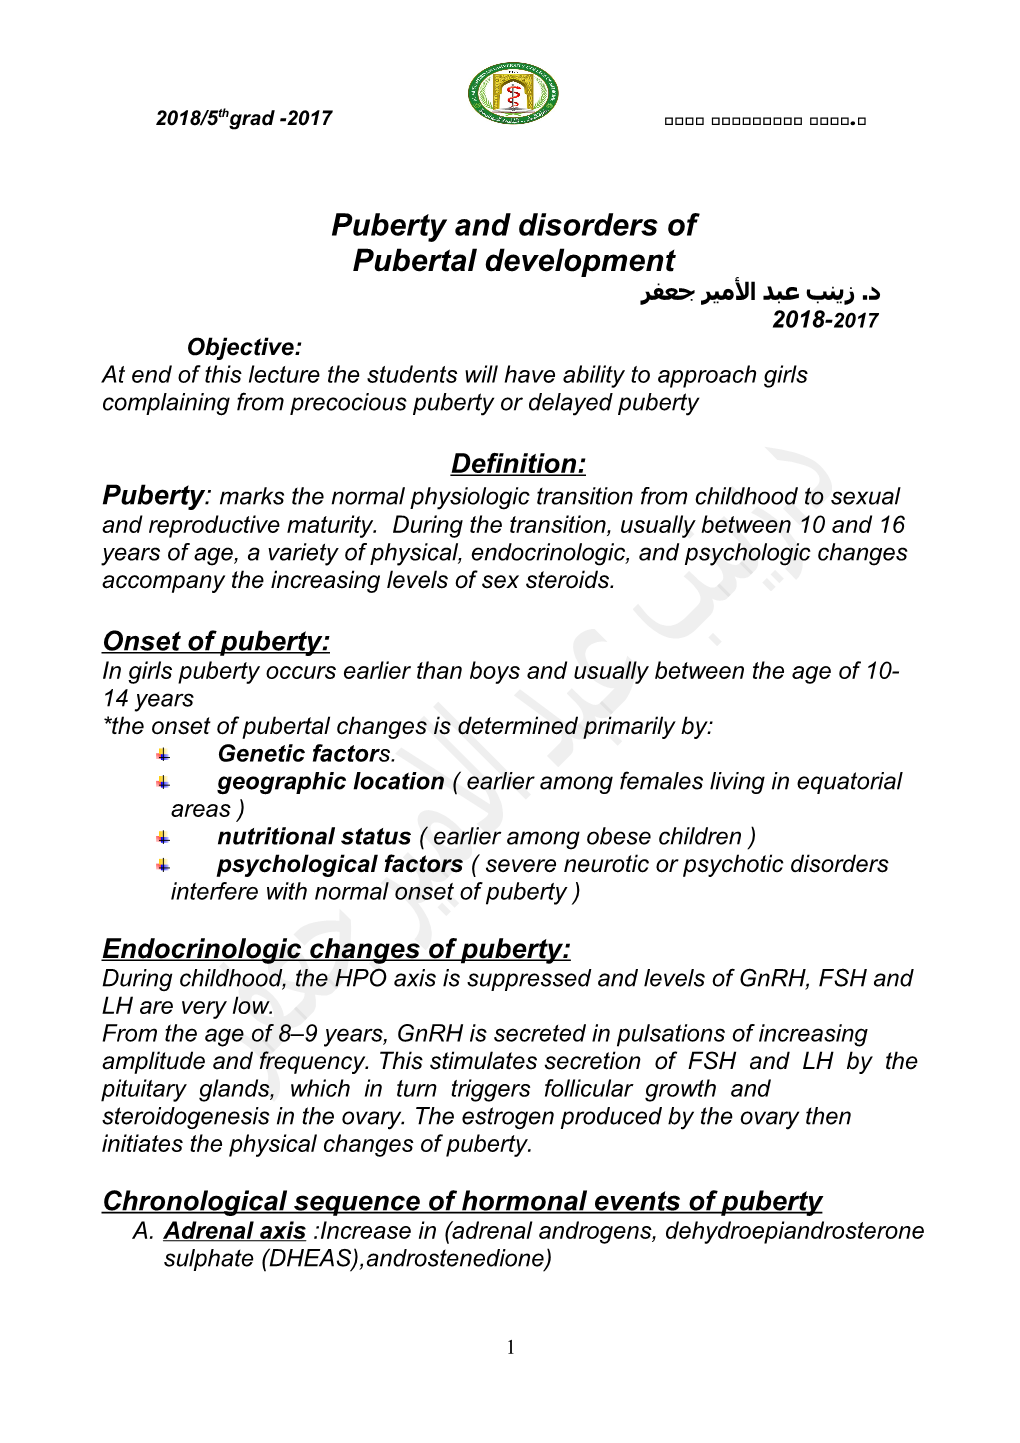 Puberty and Disorders of Pubertal Development